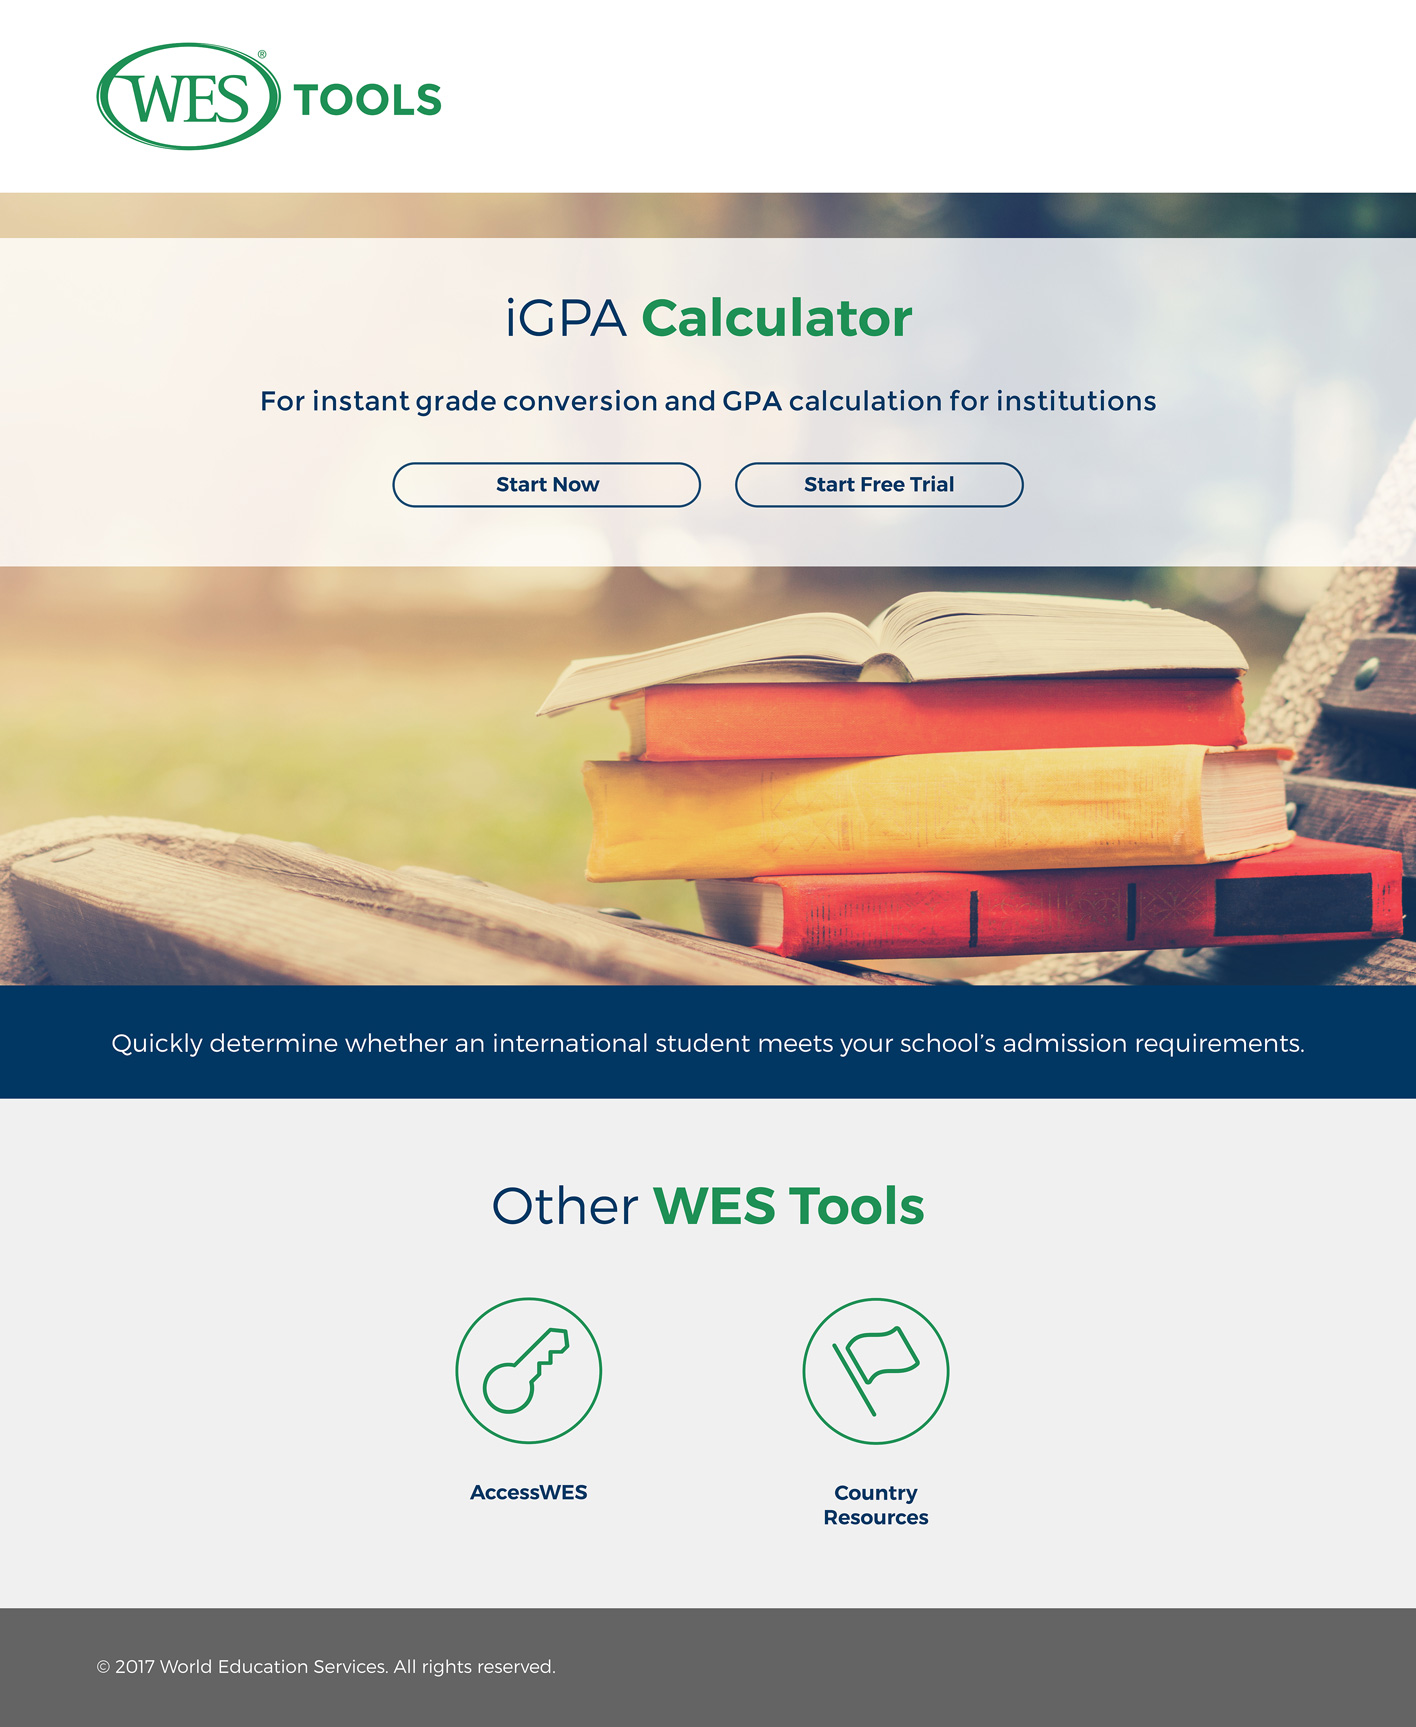 Design for the landing page of World Education Services' iGPA calendar. Includes logo, hero image of a stack of books, buttons to access the tool, and links to other tools, including AccessWES.